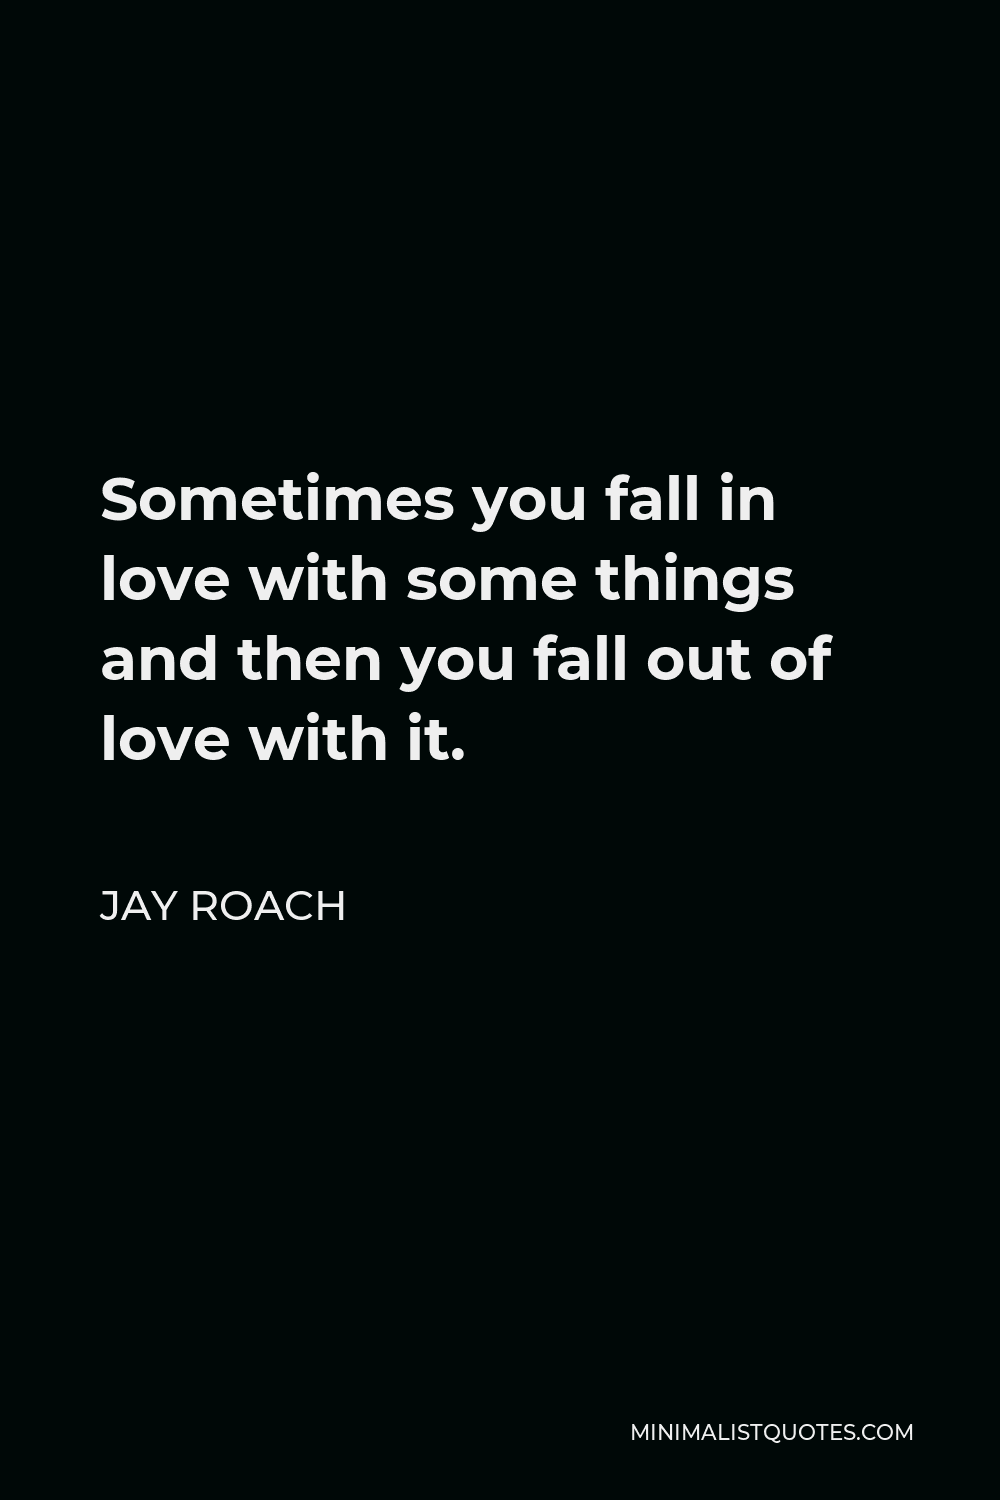 Jay Roach Quote - Sometimes you fall in love with some things and then you fall out of love with it.